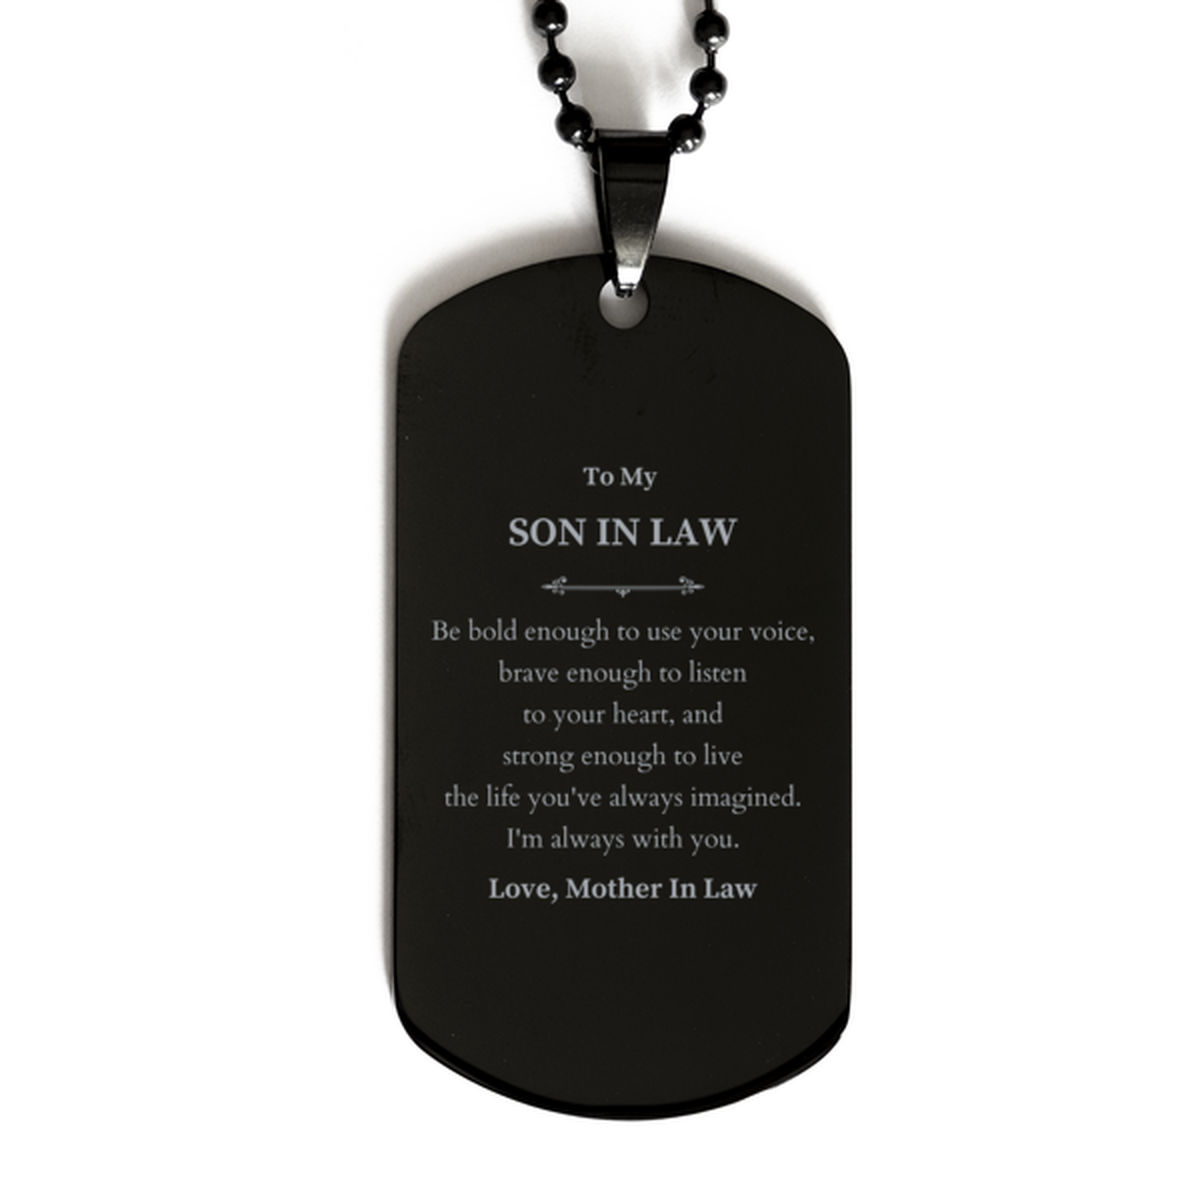 Keepsake Son In Law Black Dog Tag Gift Idea Graduation Christmas Birthday Son In Law from Mother In Law, Son In Law Be bold enough to use your voice, brave enough to listen to your heart. Love, Mother In Law